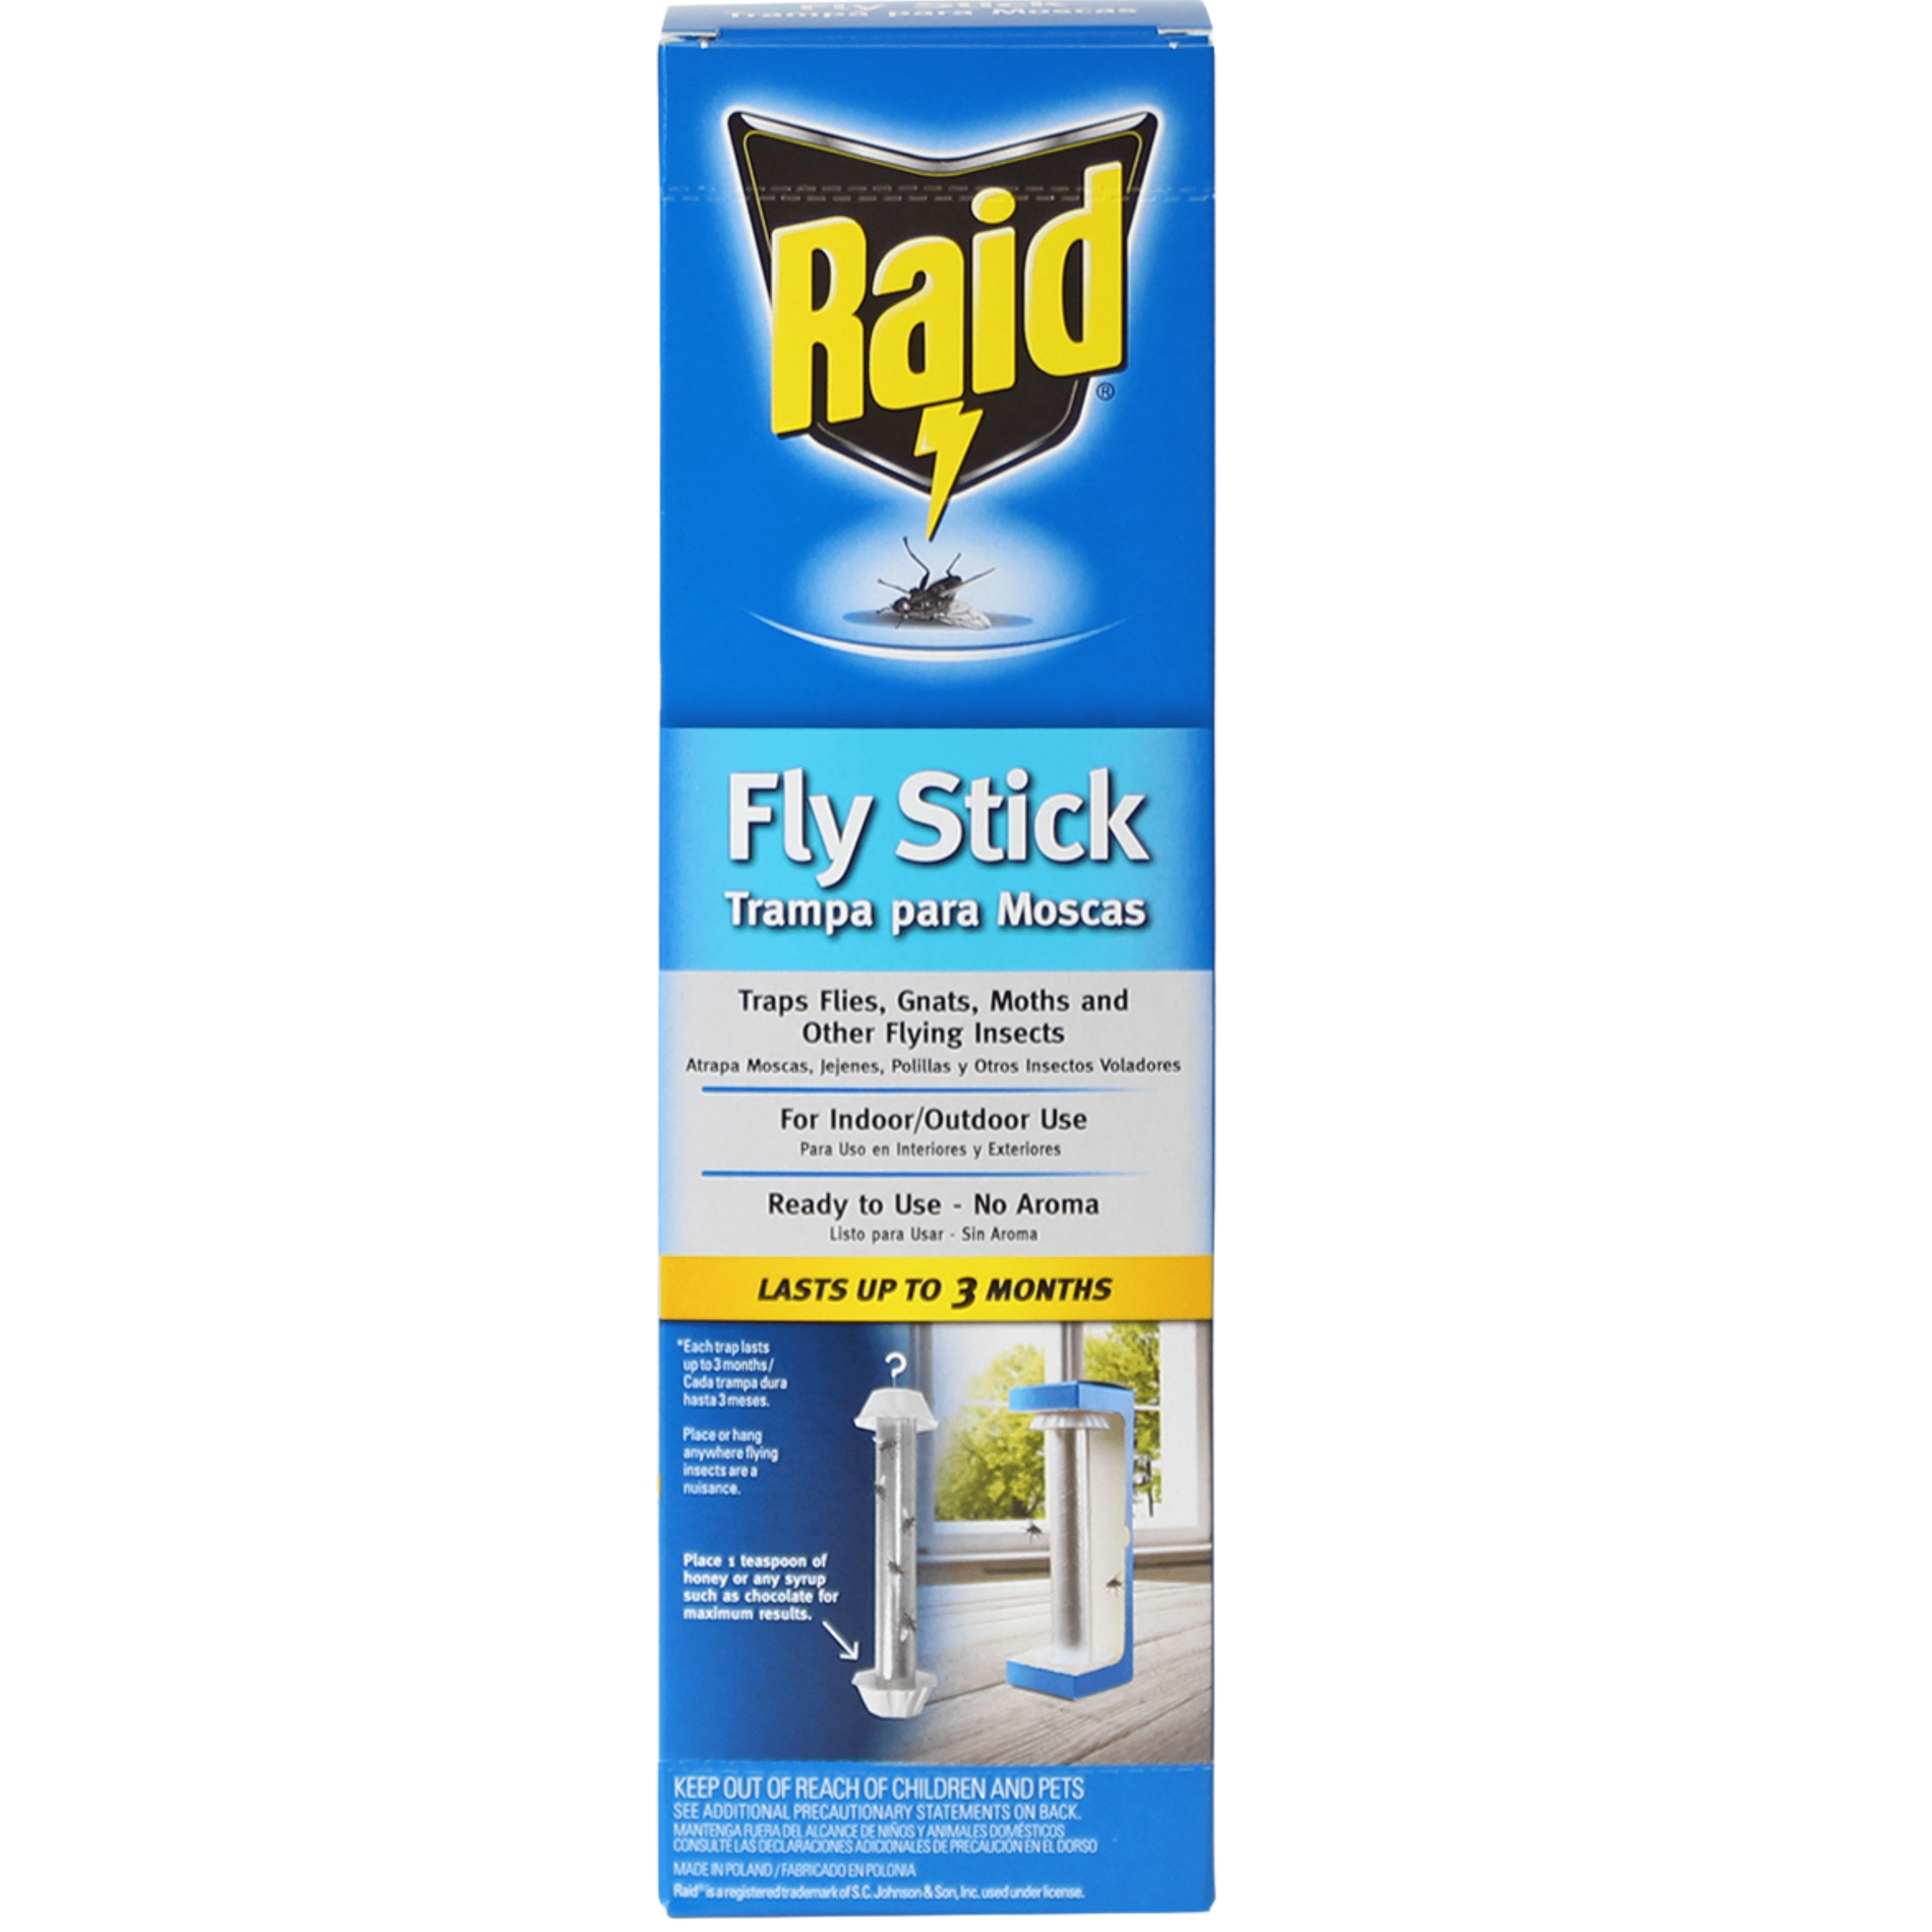 Raid Fly Stick, Pack of 1, Each Trap Catches up to 150 Flies, Indoor and Outdoor Use